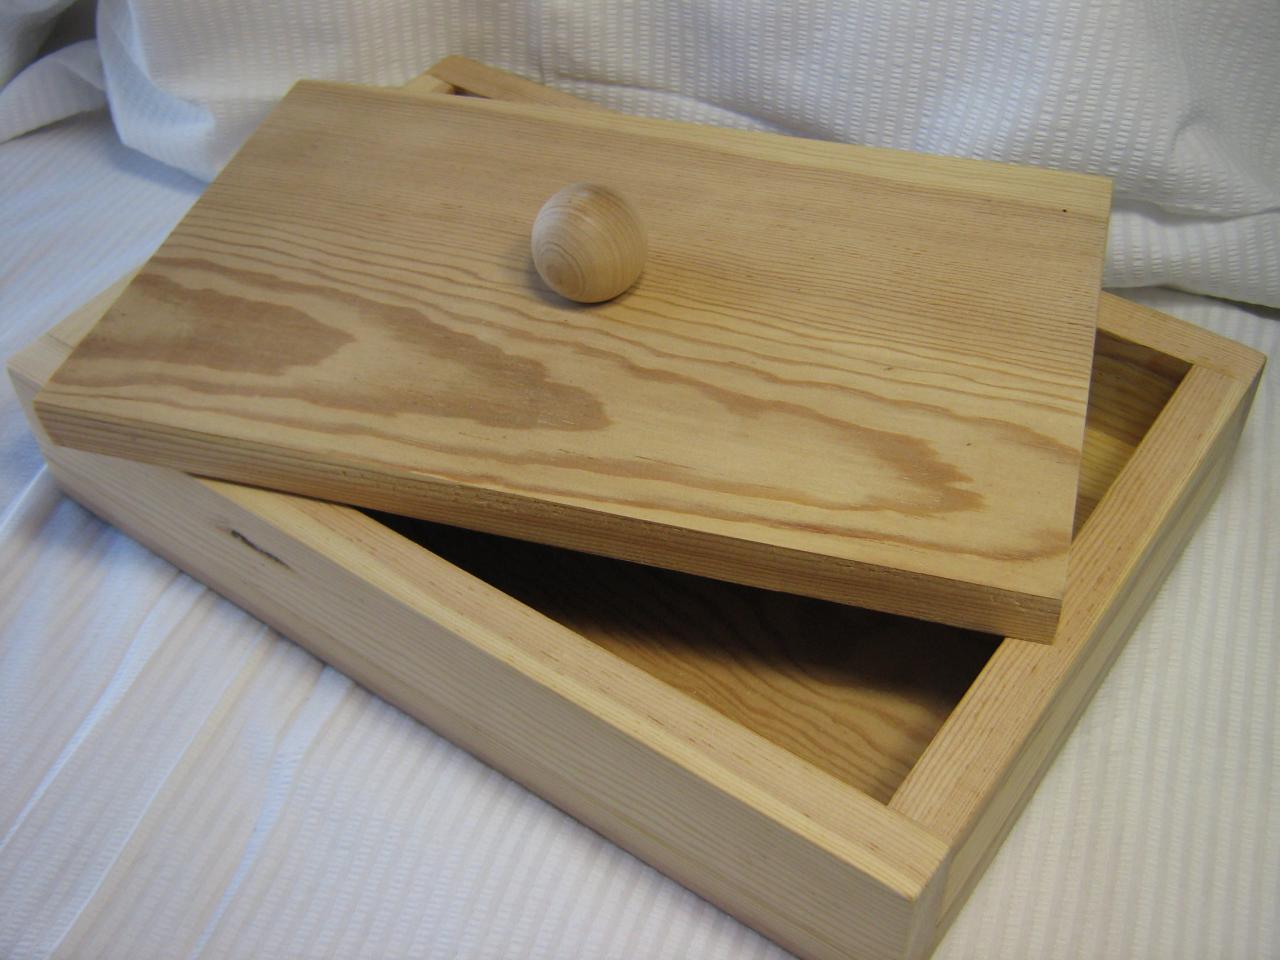 Flat Wood Soap Mold With Lid - Handmade In Colorado